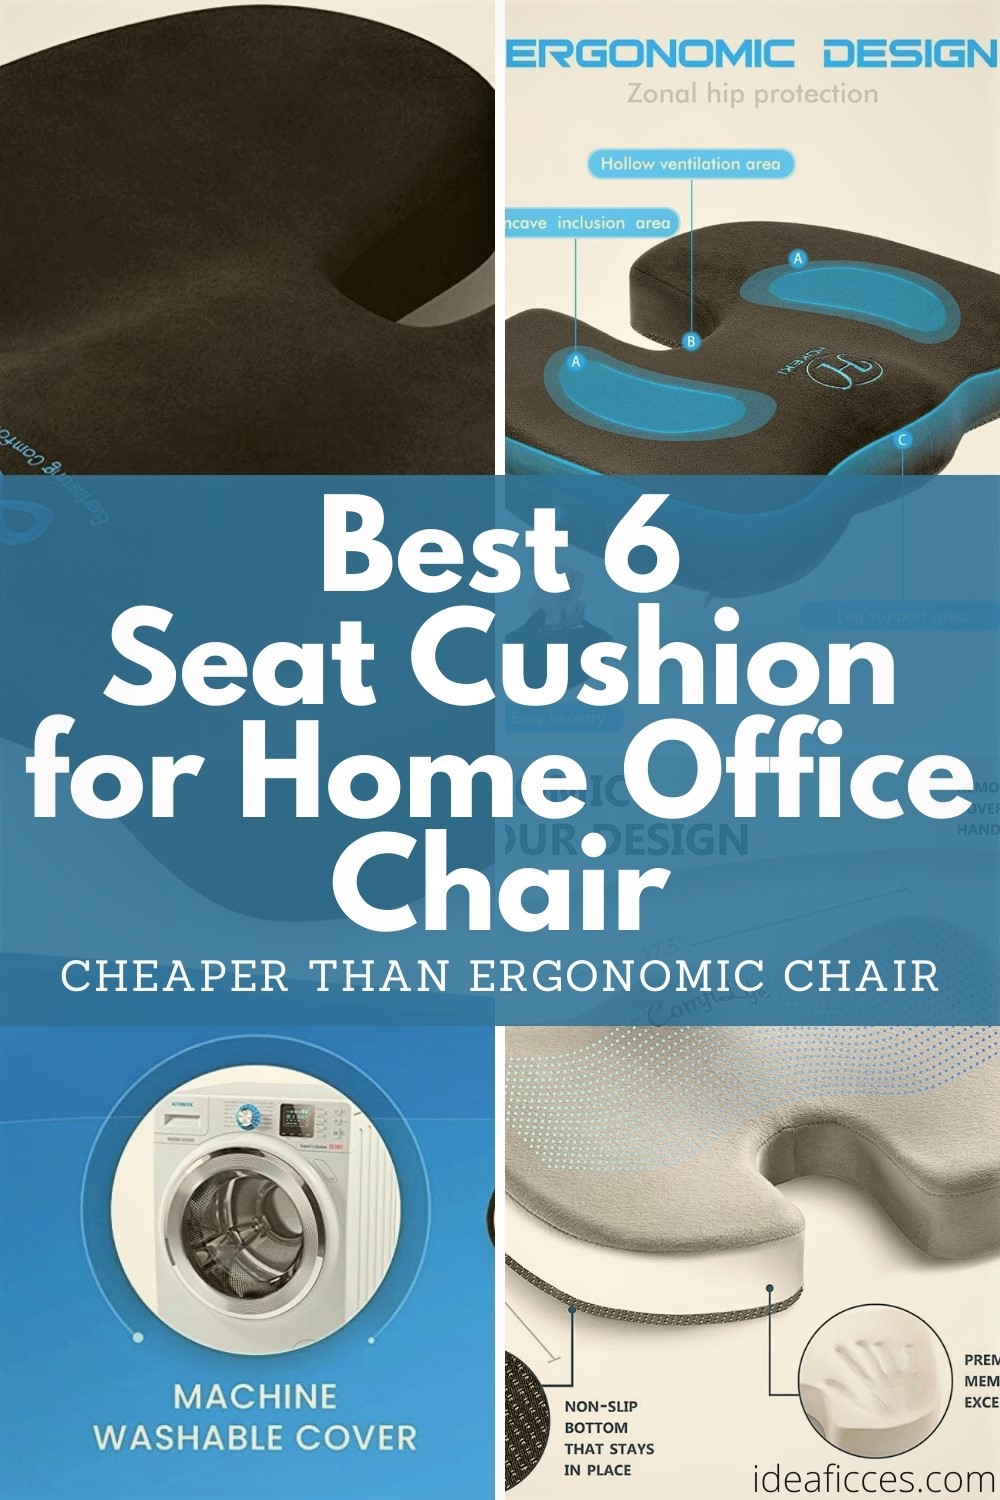 Best 6 Seat Cushion for Home Office Chair - Ideas for Home Office